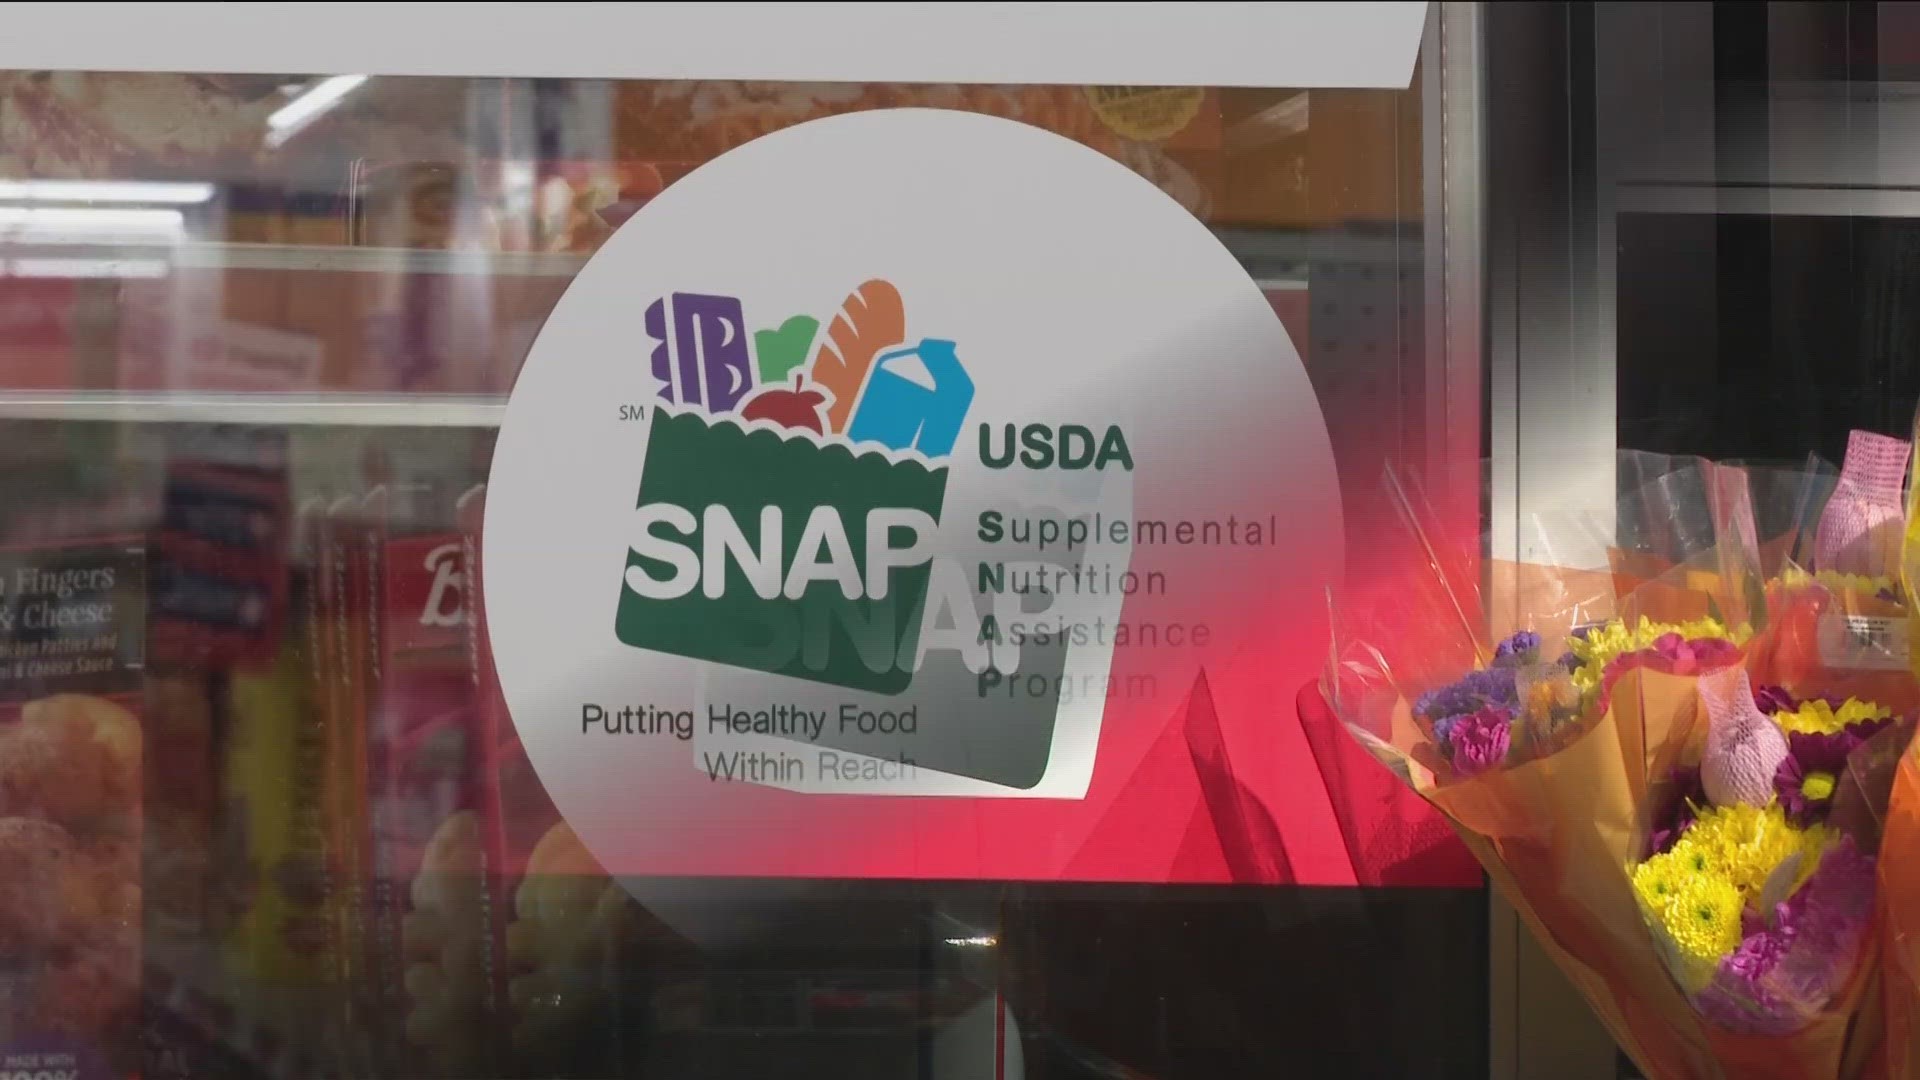 The USDA says Georgia is "severely out of compliance" when it comes to issuing SNAP benefits on time.